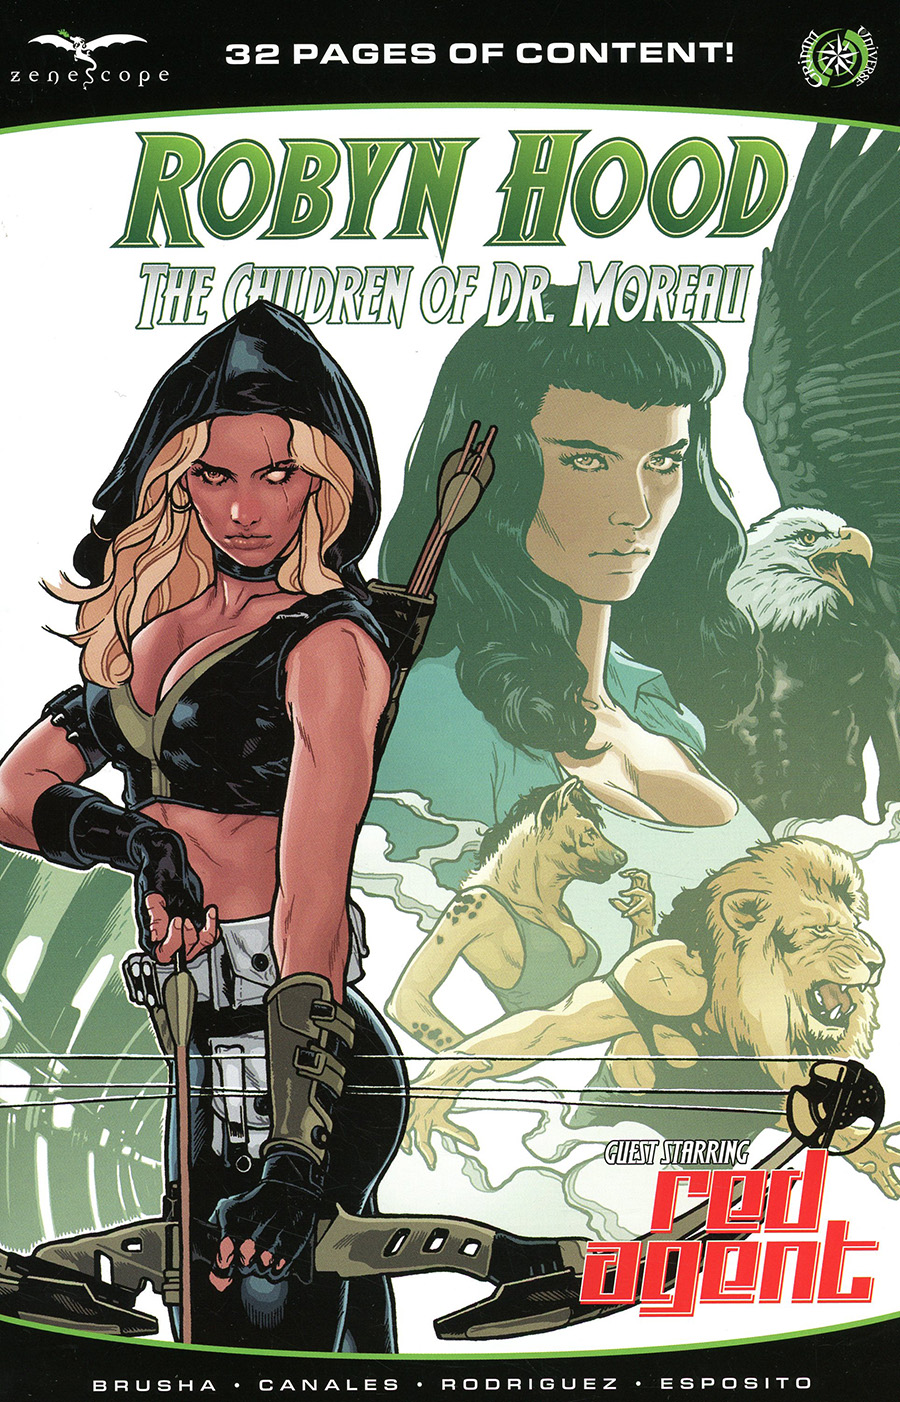 Grimm Fairy Tales Presents Robyn Hood Children Of Dr Moreau #1 (One Shot) Cover A Jeff Spokes